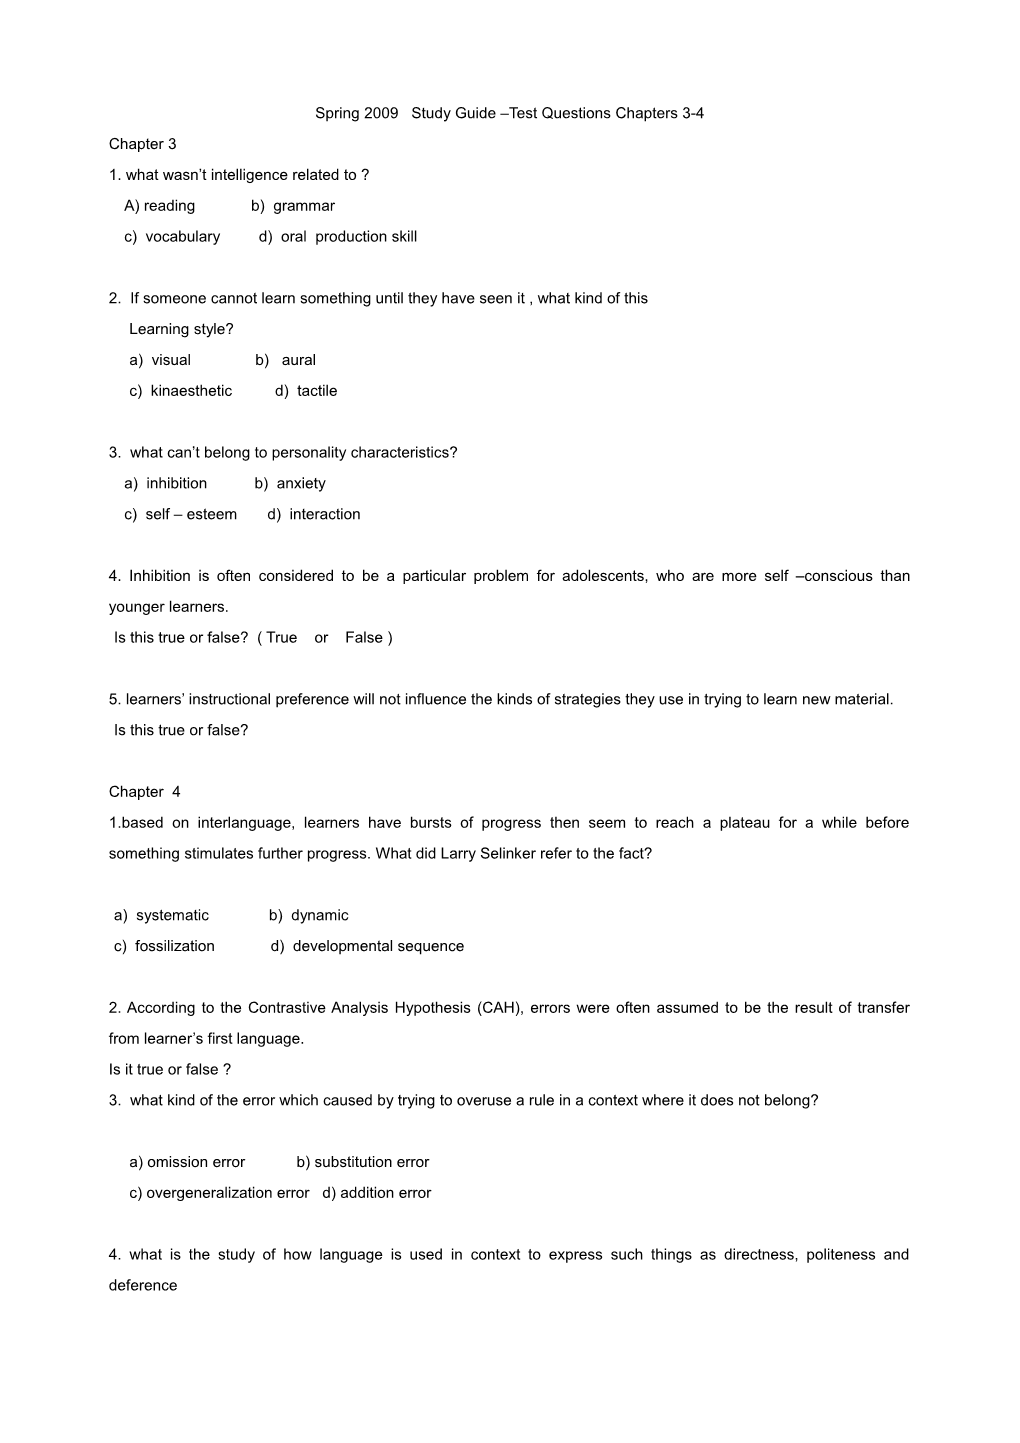 Spring 2009 Study Guide Test Questions Chapters 3-4